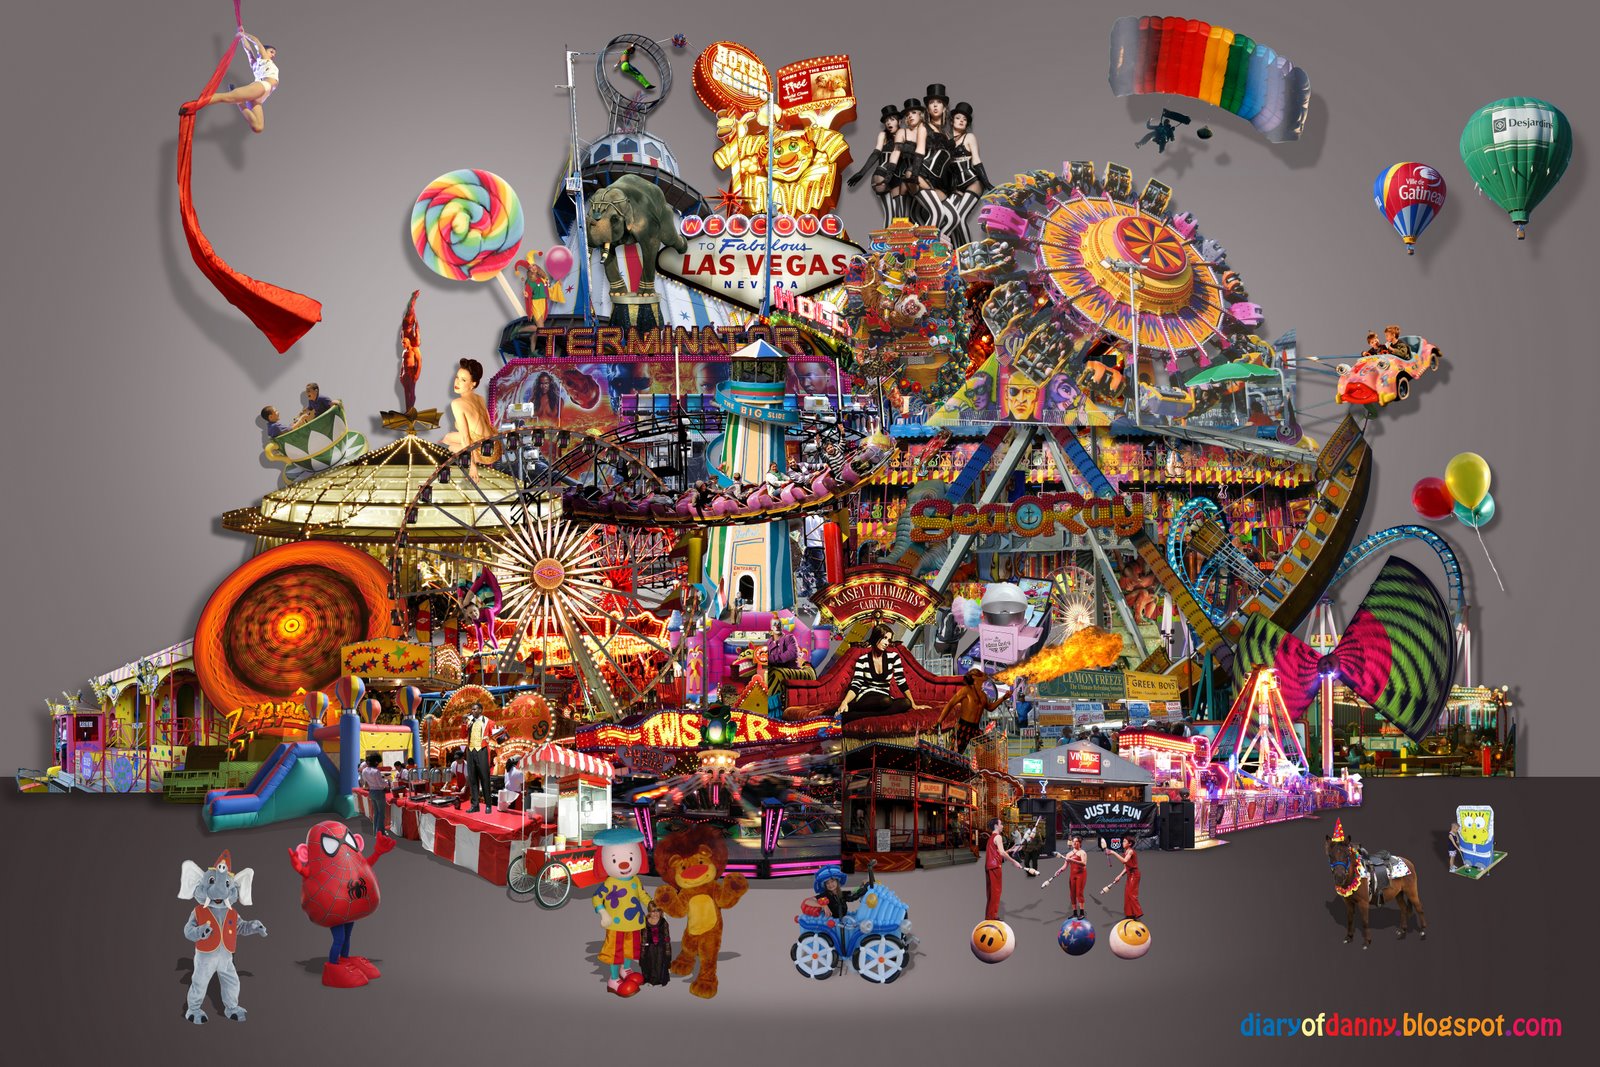 [Danny's+Carnival+Photomontage+poster+with+watermark+copy.jpg]